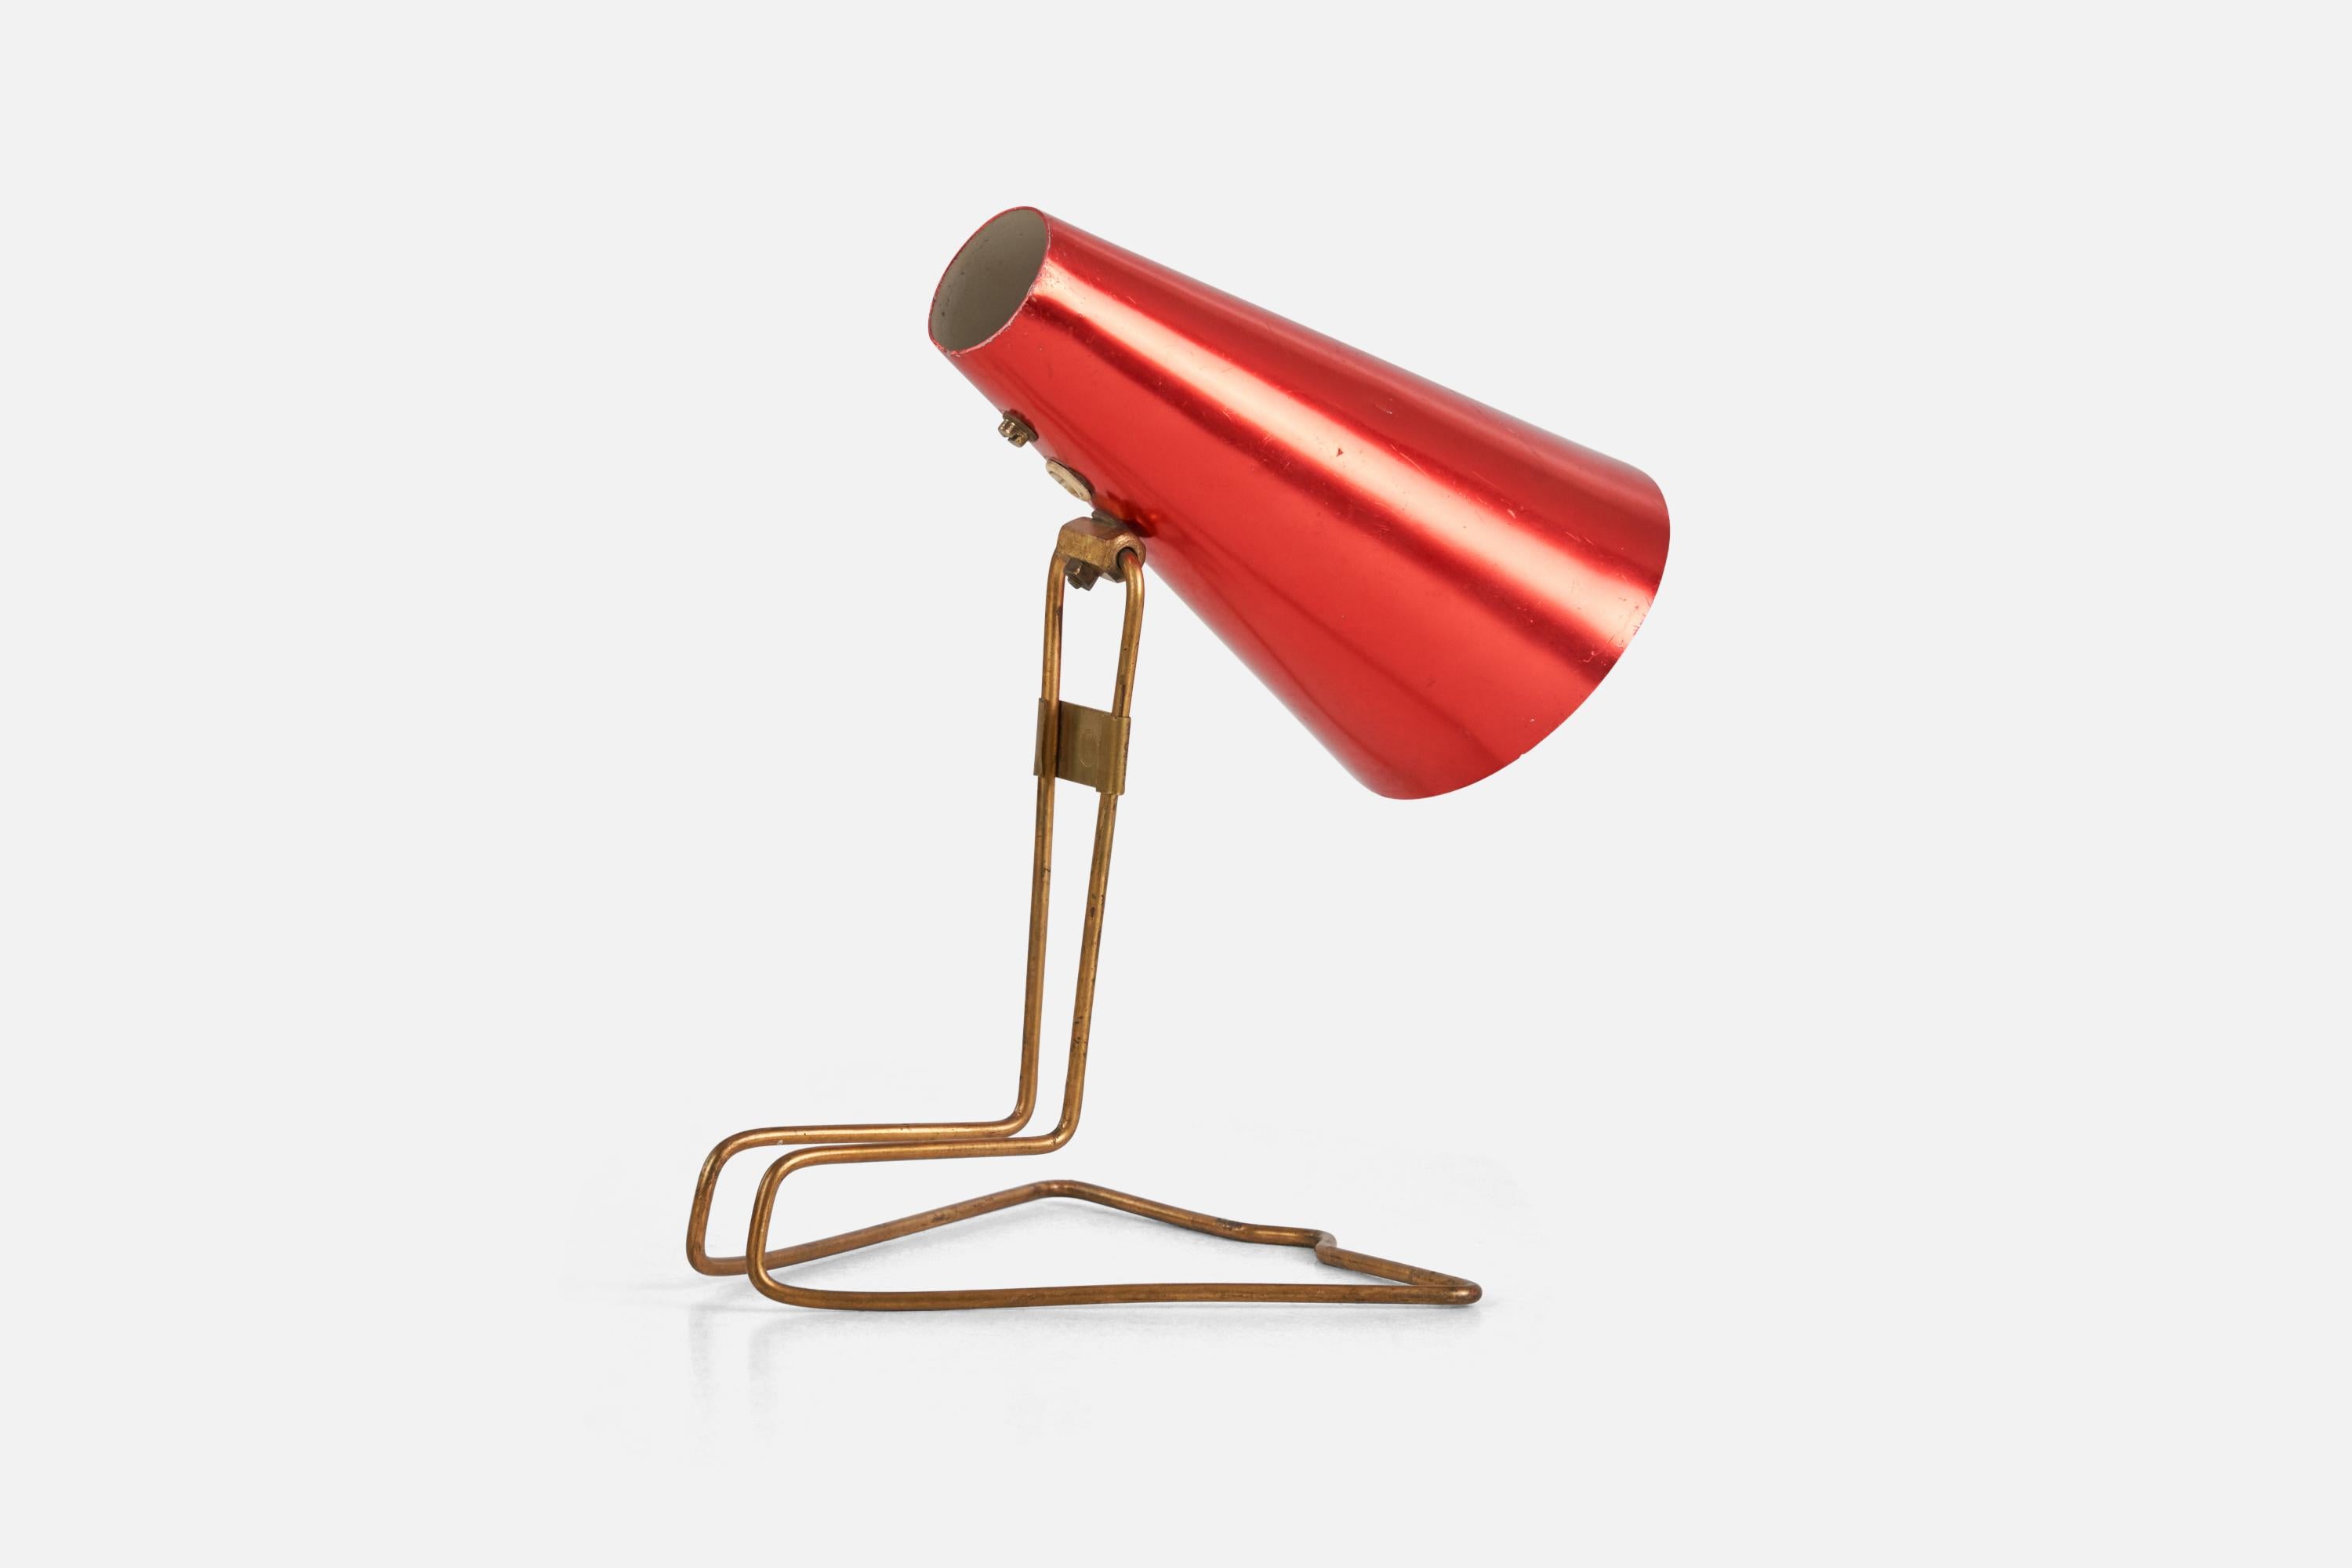 Mid-Century Modern Idman Oy, Adjustable Table Lamp, Brass, Red-Lacquered Metal, Finland, 1950s For Sale